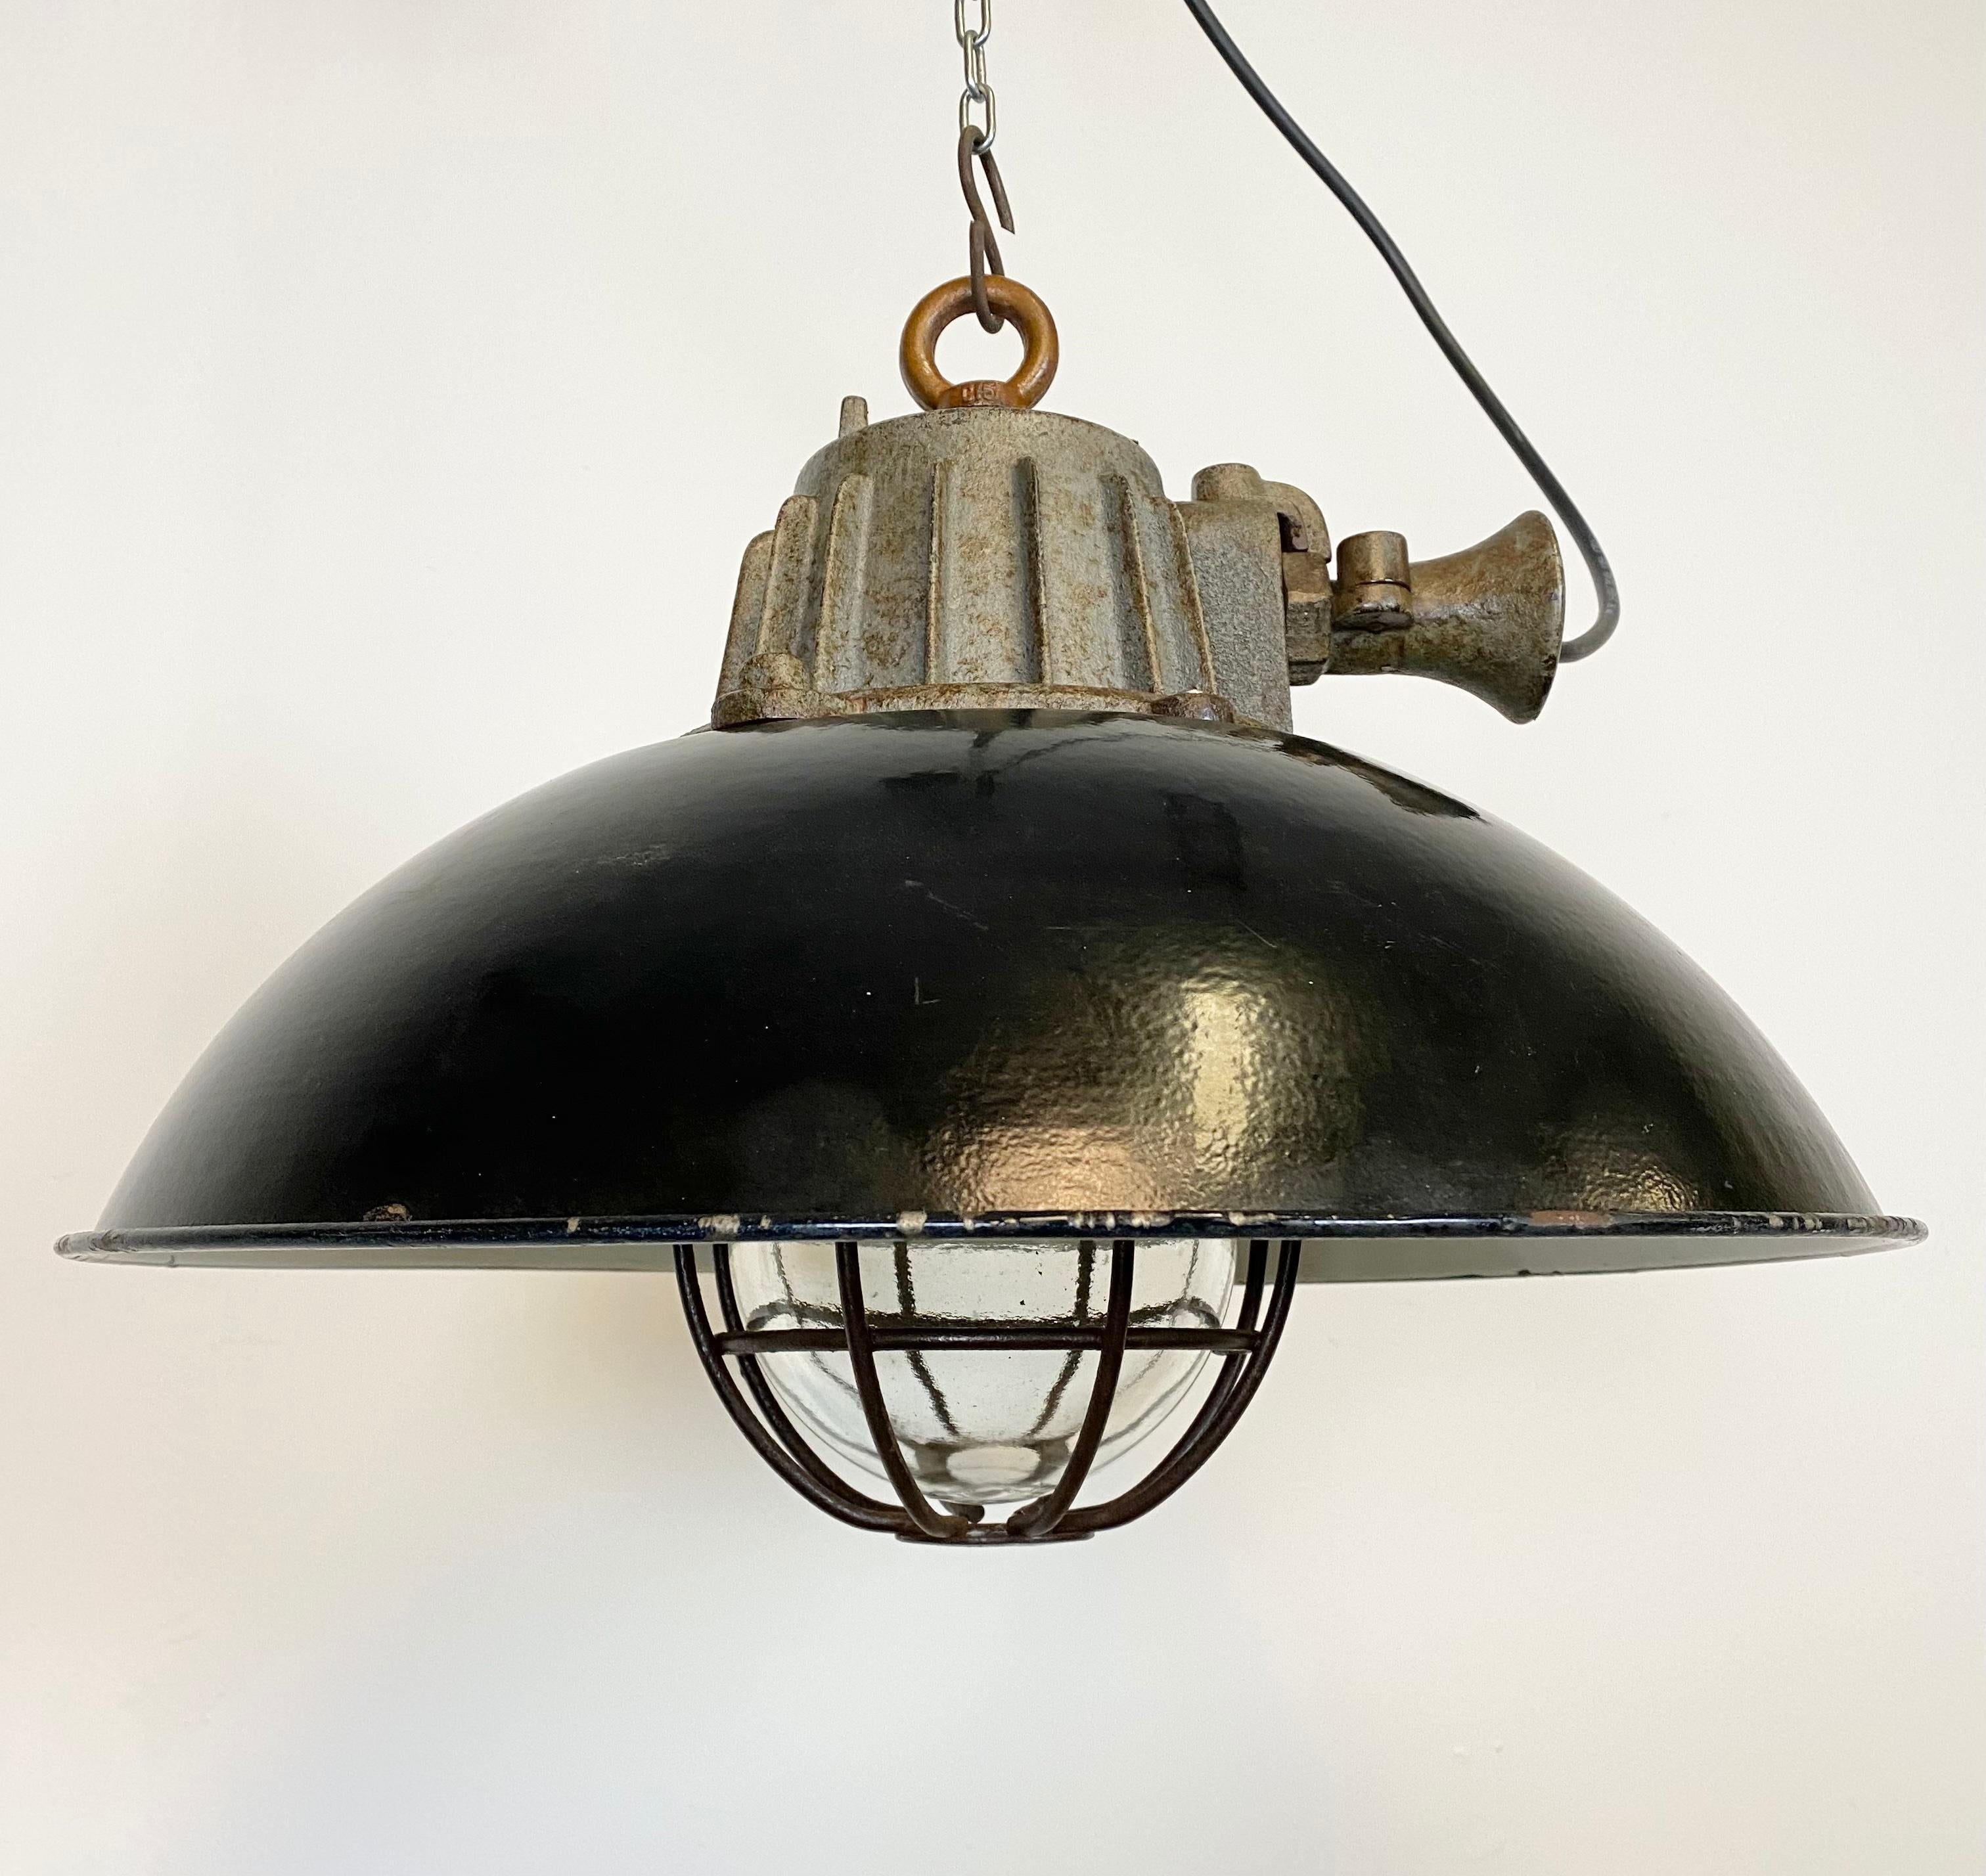 Industrial hanging lamp manufactured during the 1950s in former Czechoslovakia. It features a black enamel shade, white enamel interior, cast iron top, clear glass cover and iron grid. Porcelain socket for E 27 lightbulbs and new wire. The weight of